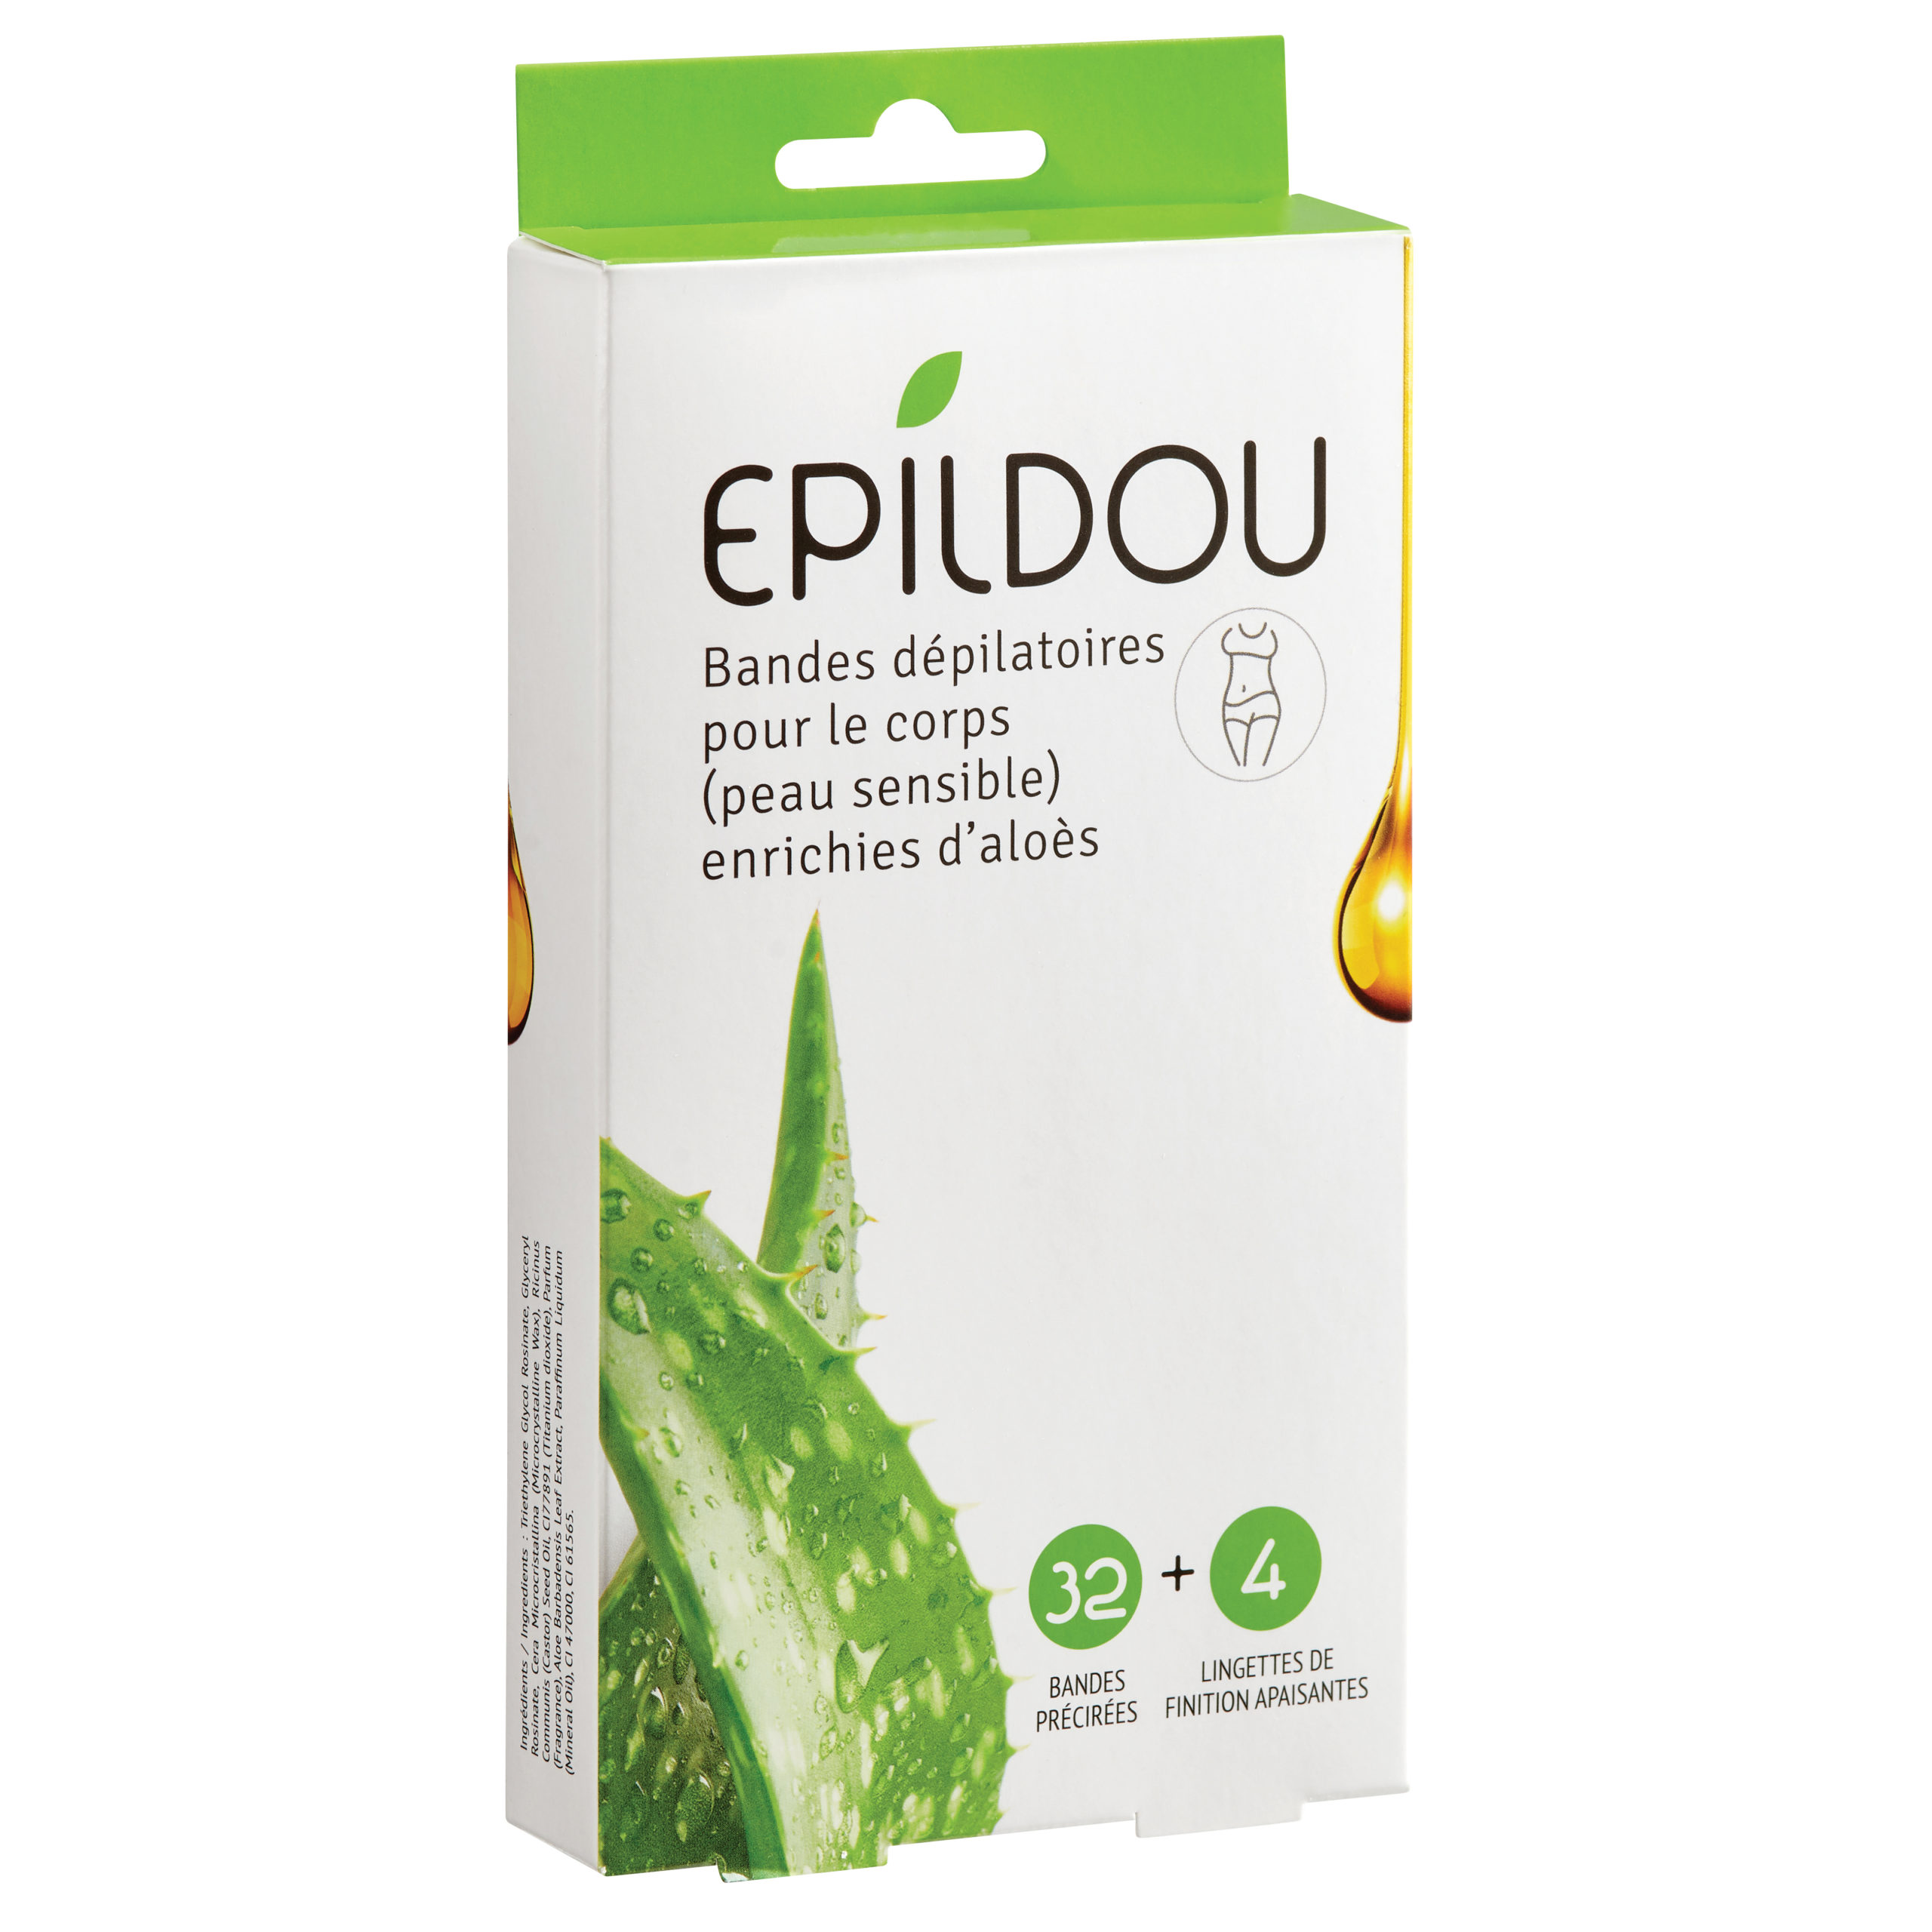 BODY DEPILATORY STRIPS ENRICHED WITH ALOE VERA